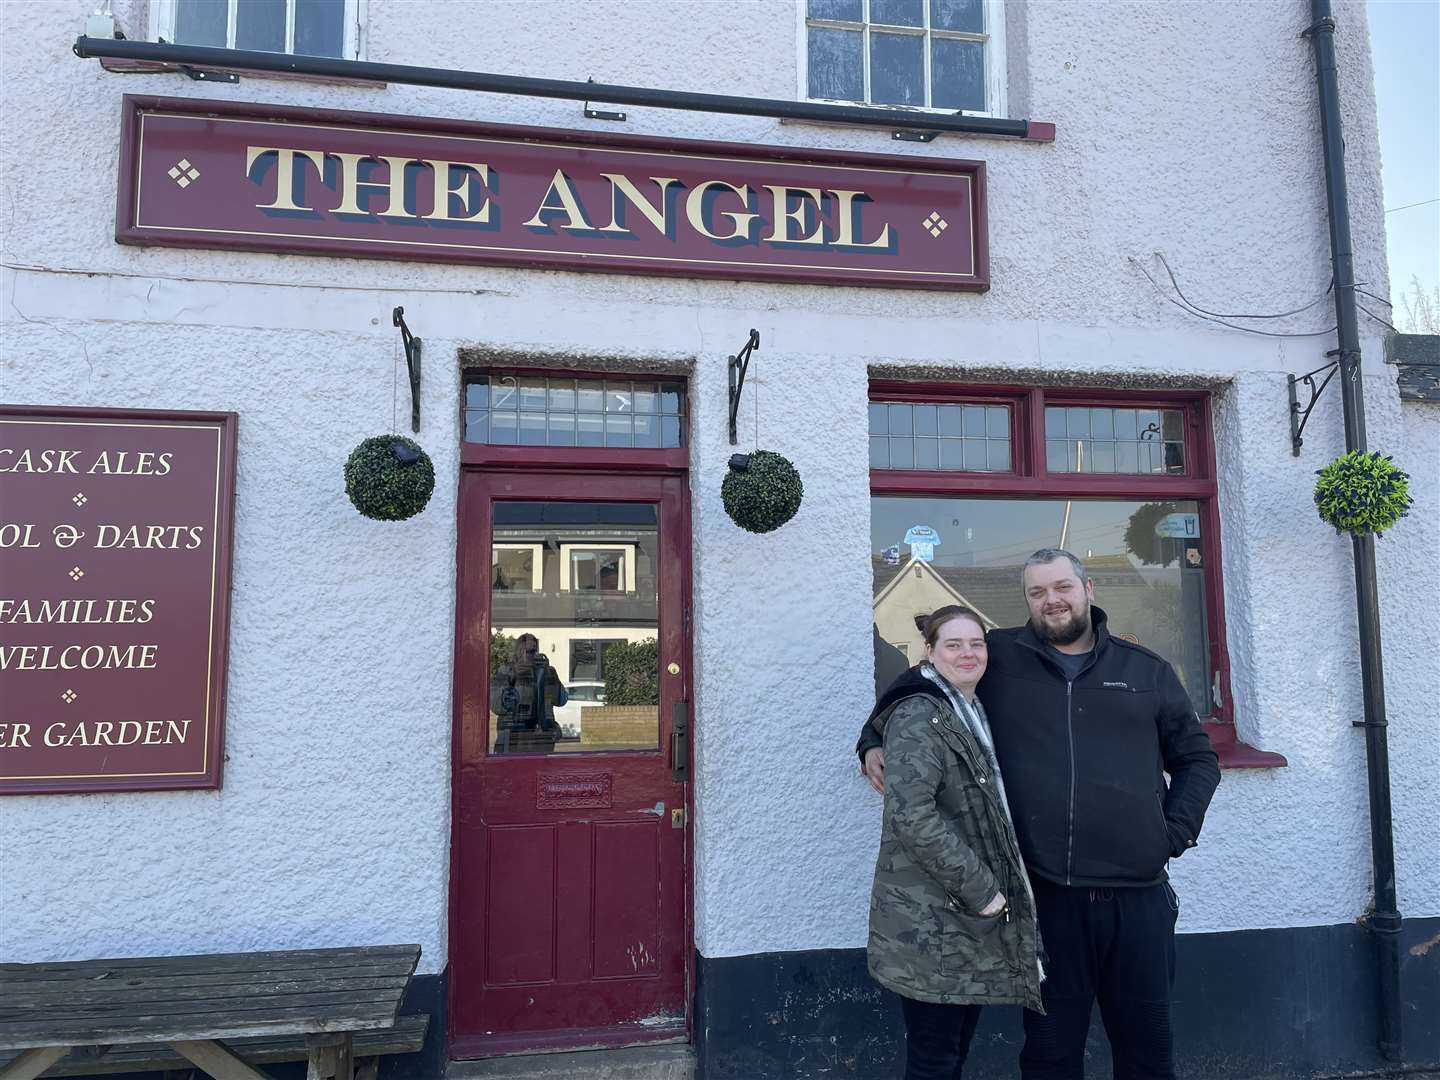 The Angel will be closing in a few months to undergo a massive refurbishment